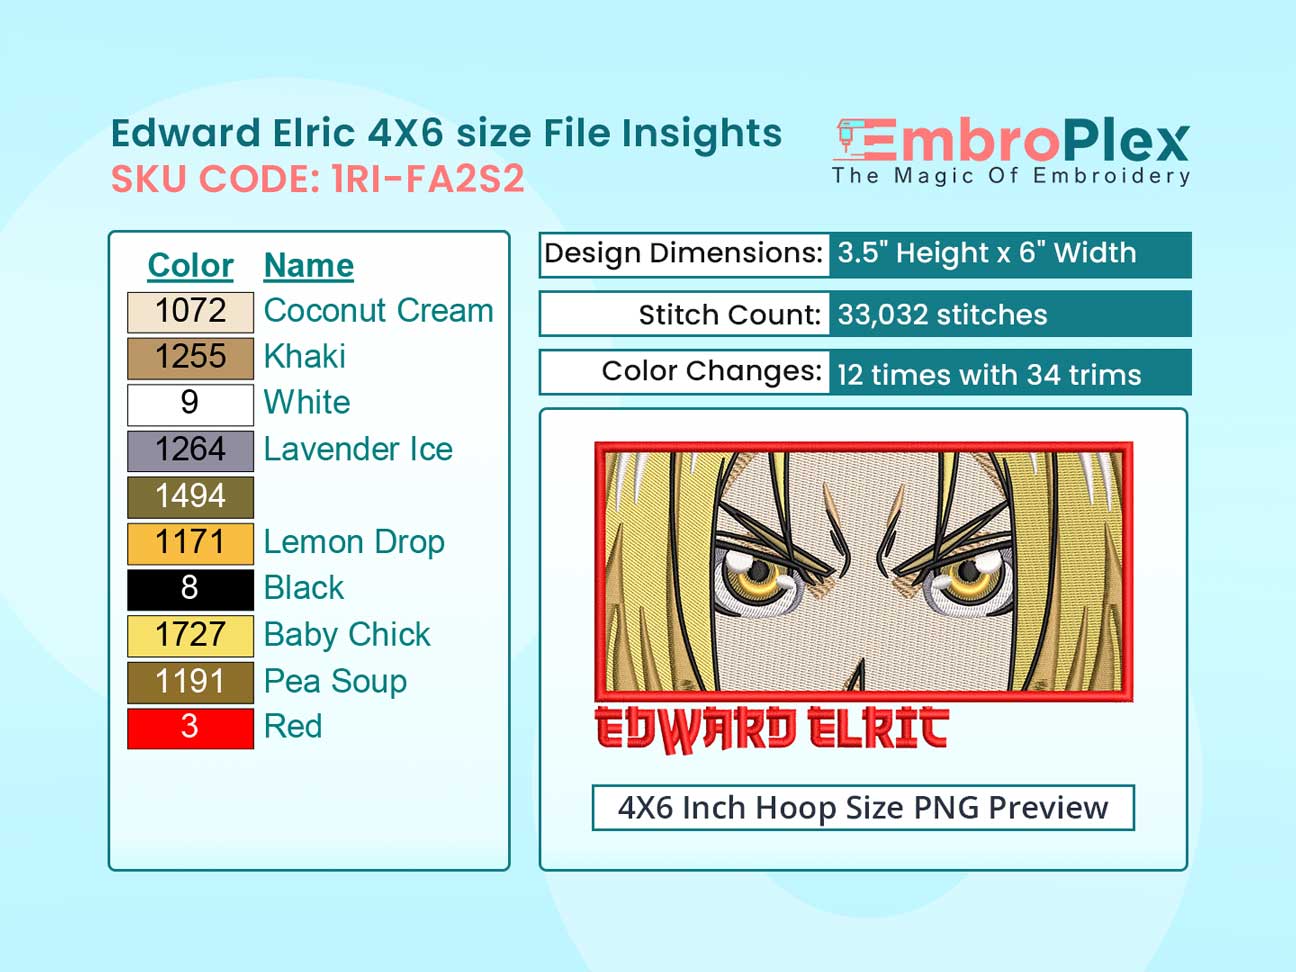 Anime-Inspired Edward Elric Embroidery Design File - 4x6 Inch hoop Size Variation overview image